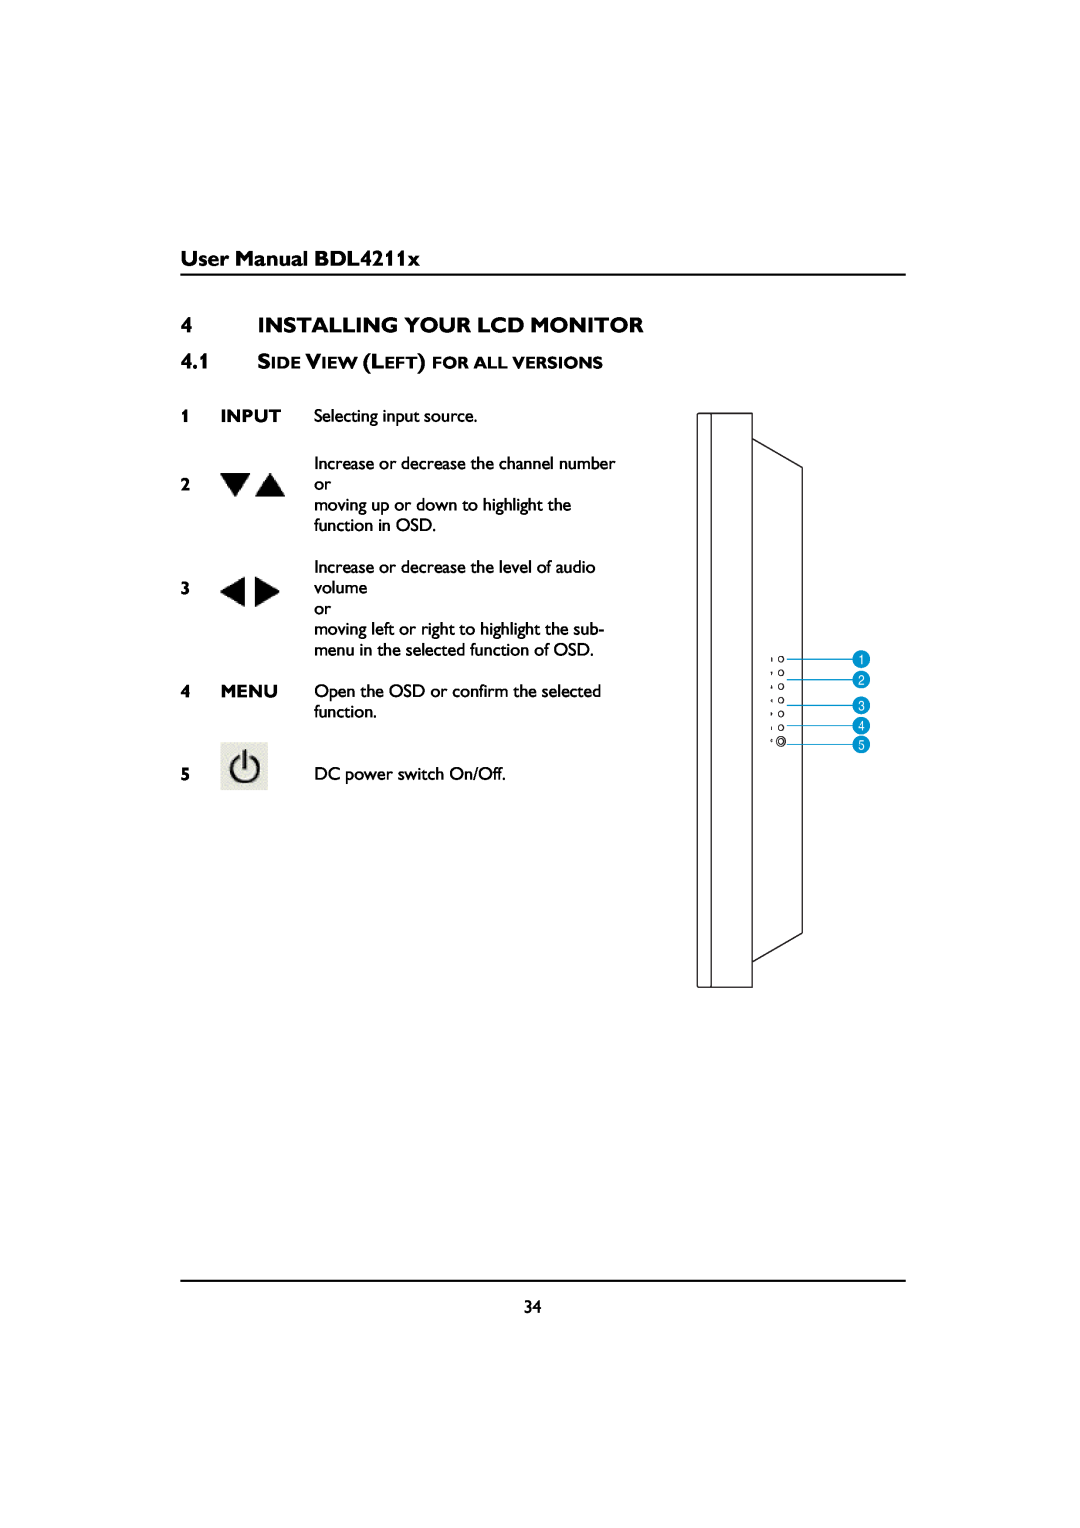 Philips BDL4211V, BDL4211C, BDL4211P User Manual BDL4211x 4 INSTALLING YOUR LCD MONITOR, Side View Left For All Versions 